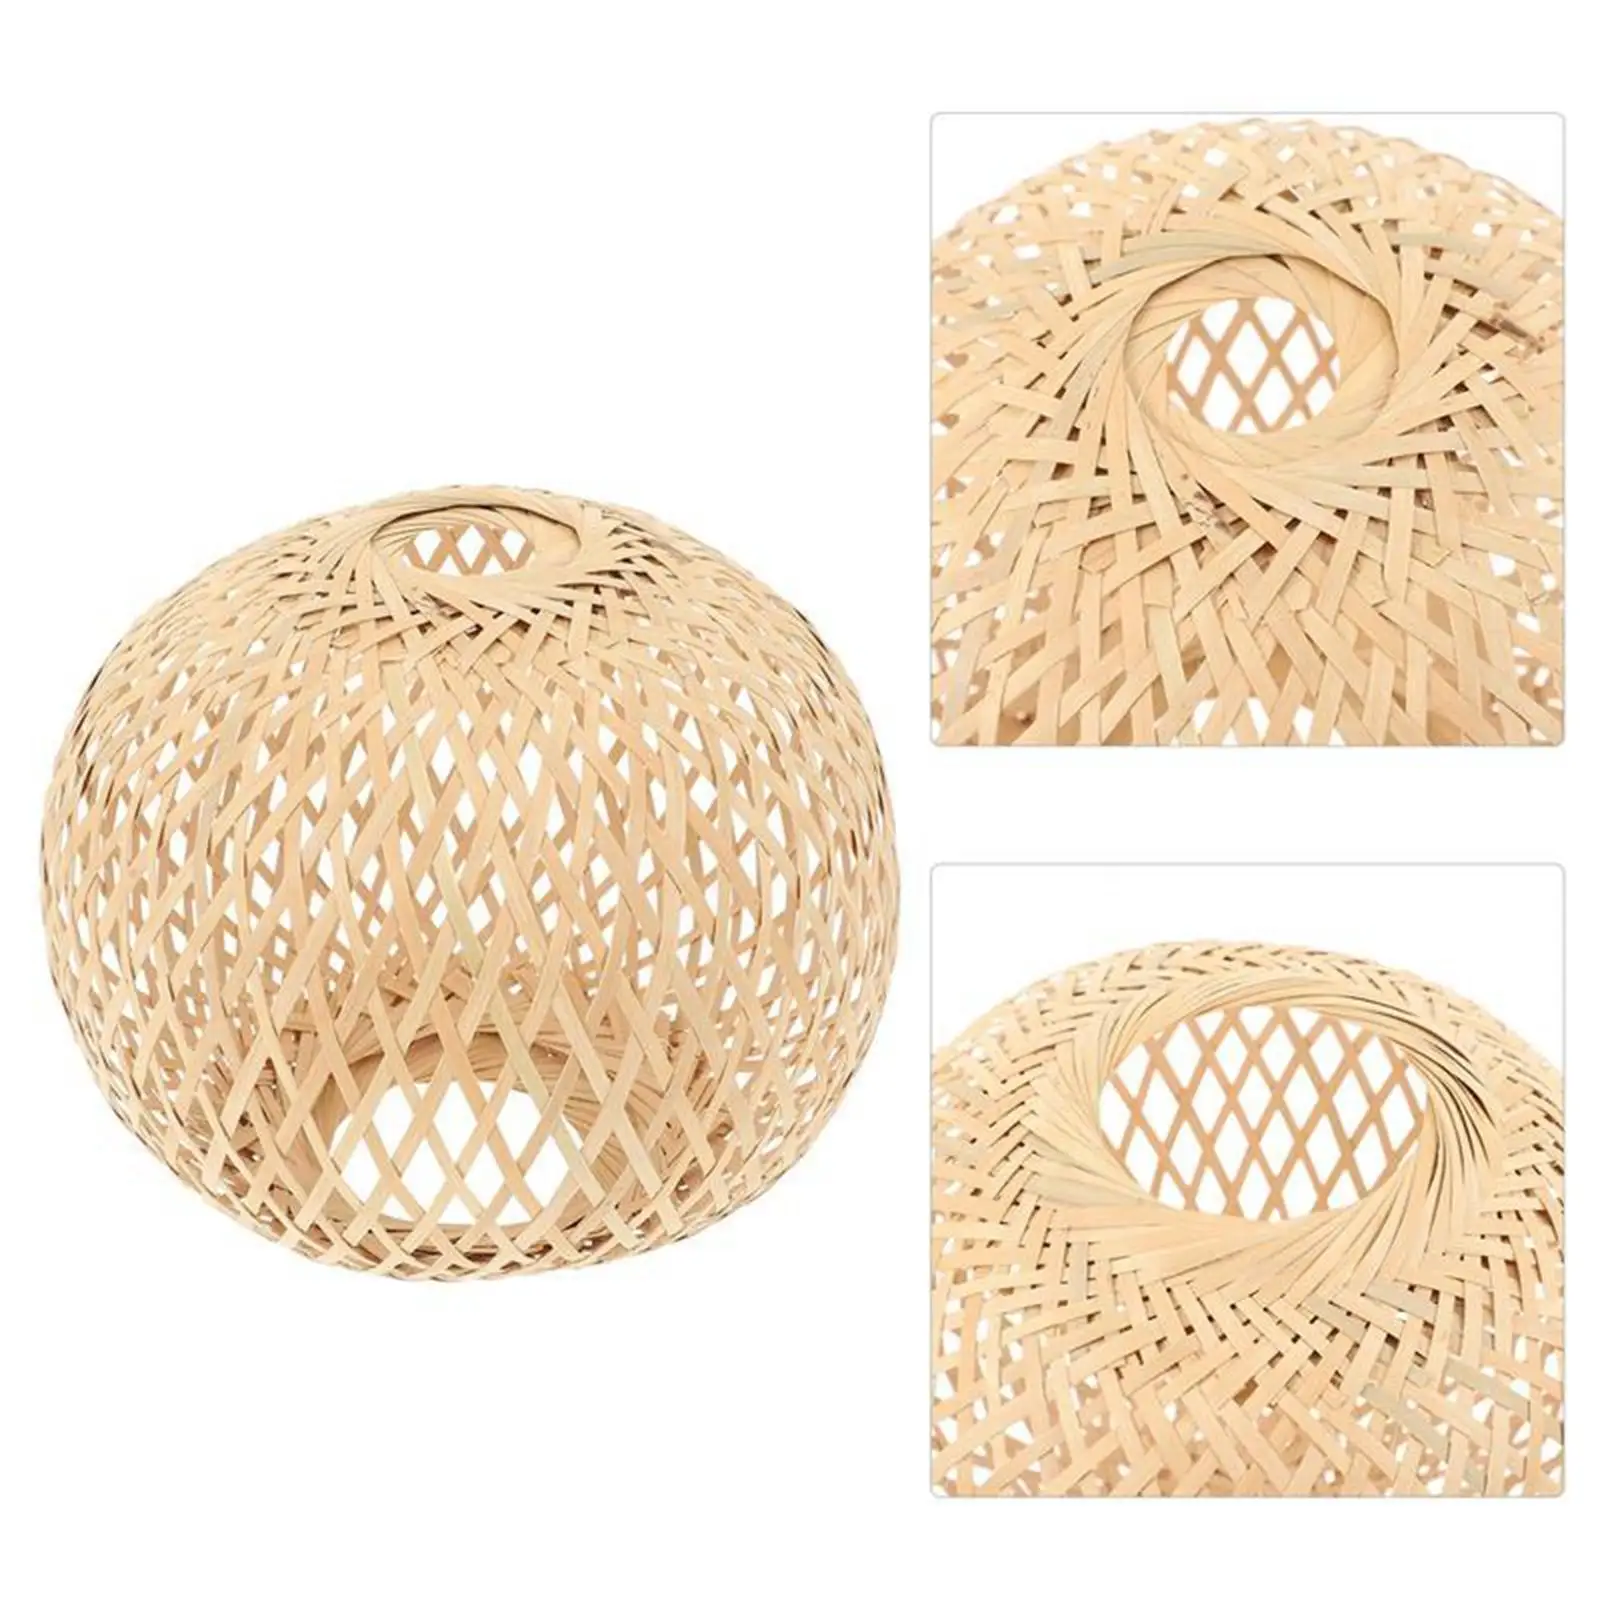 

Bamboo Woven Lampshade Handwoven Rustic for Kitchen Island Teahouse 18x19cm